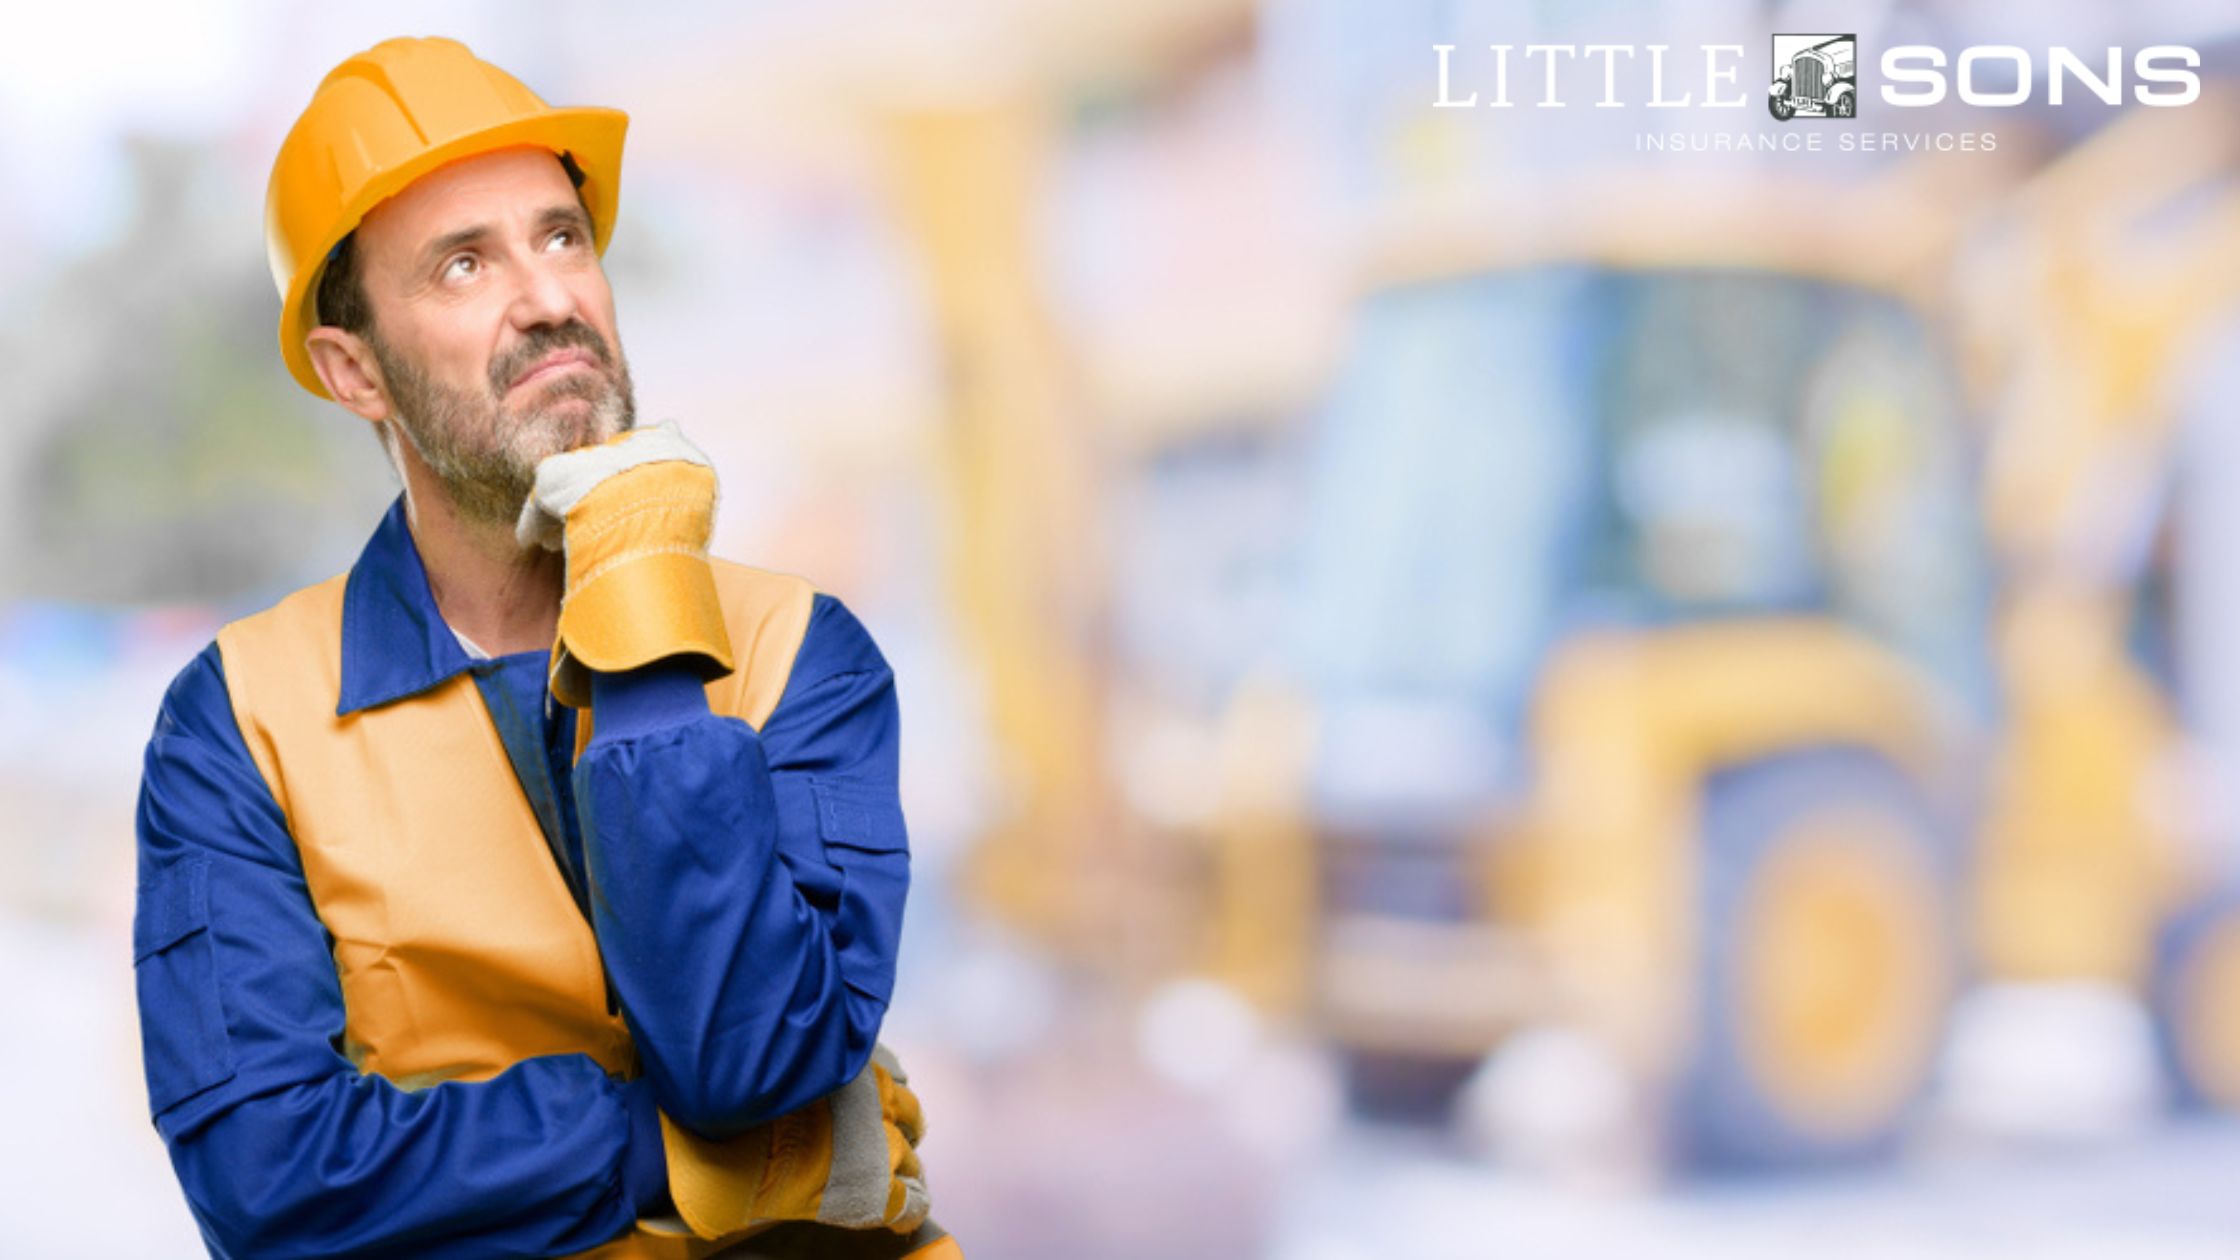 Answering the Frequently Asked Questions About Workers’ Compensation Benefits